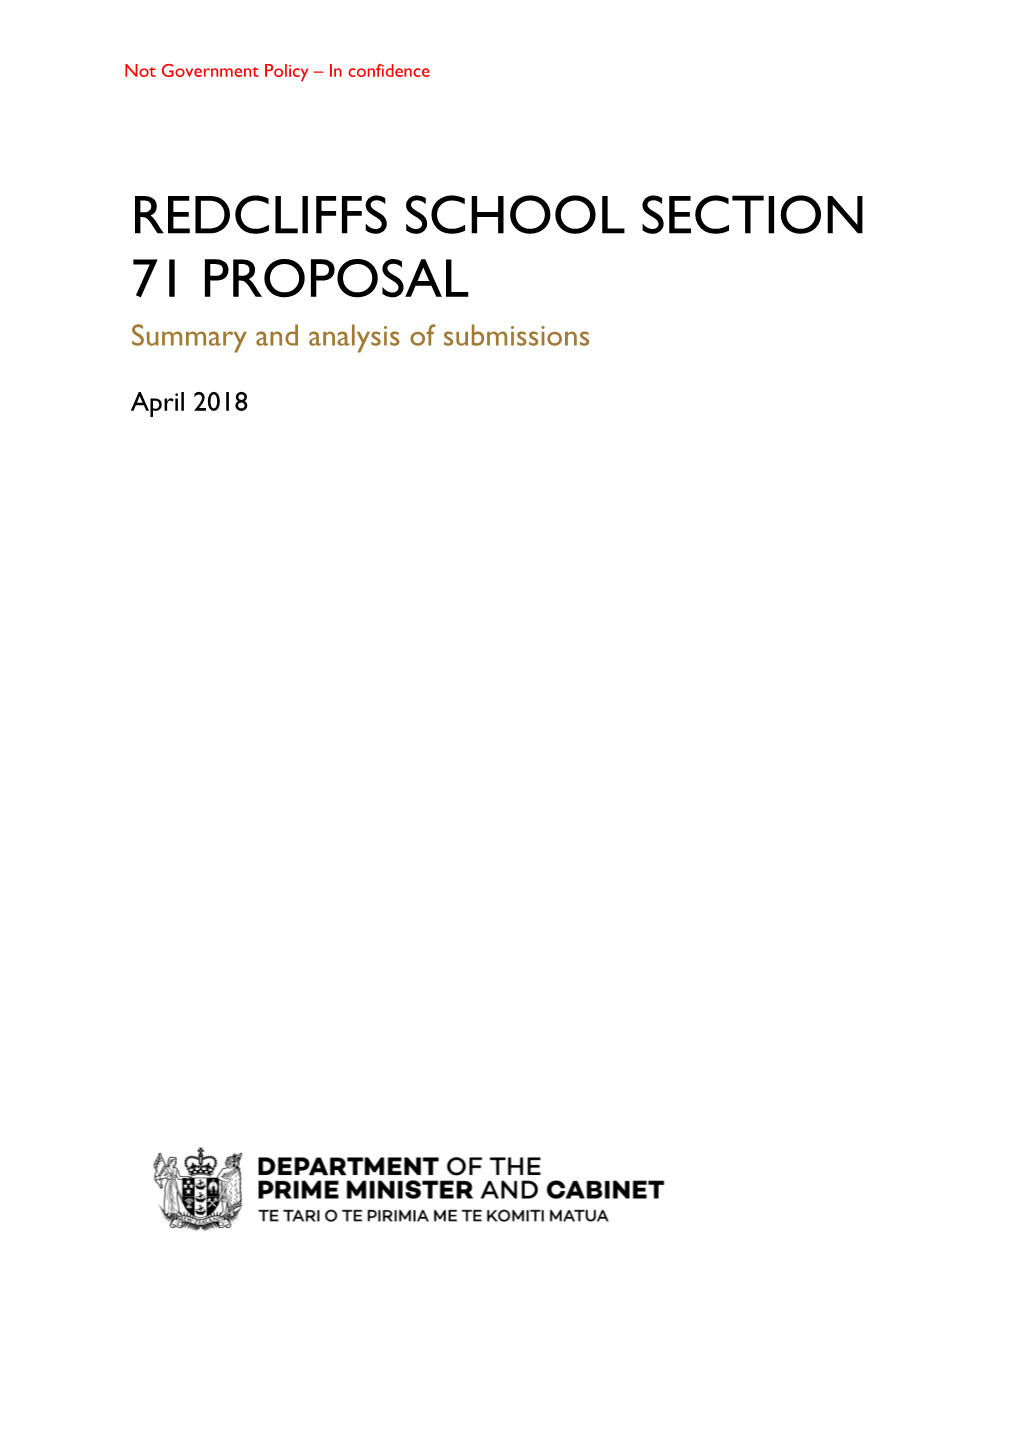 REDCLIFFS SCHOOL SECTION 71 PROPOSAL Summary and Analysis of Submissions